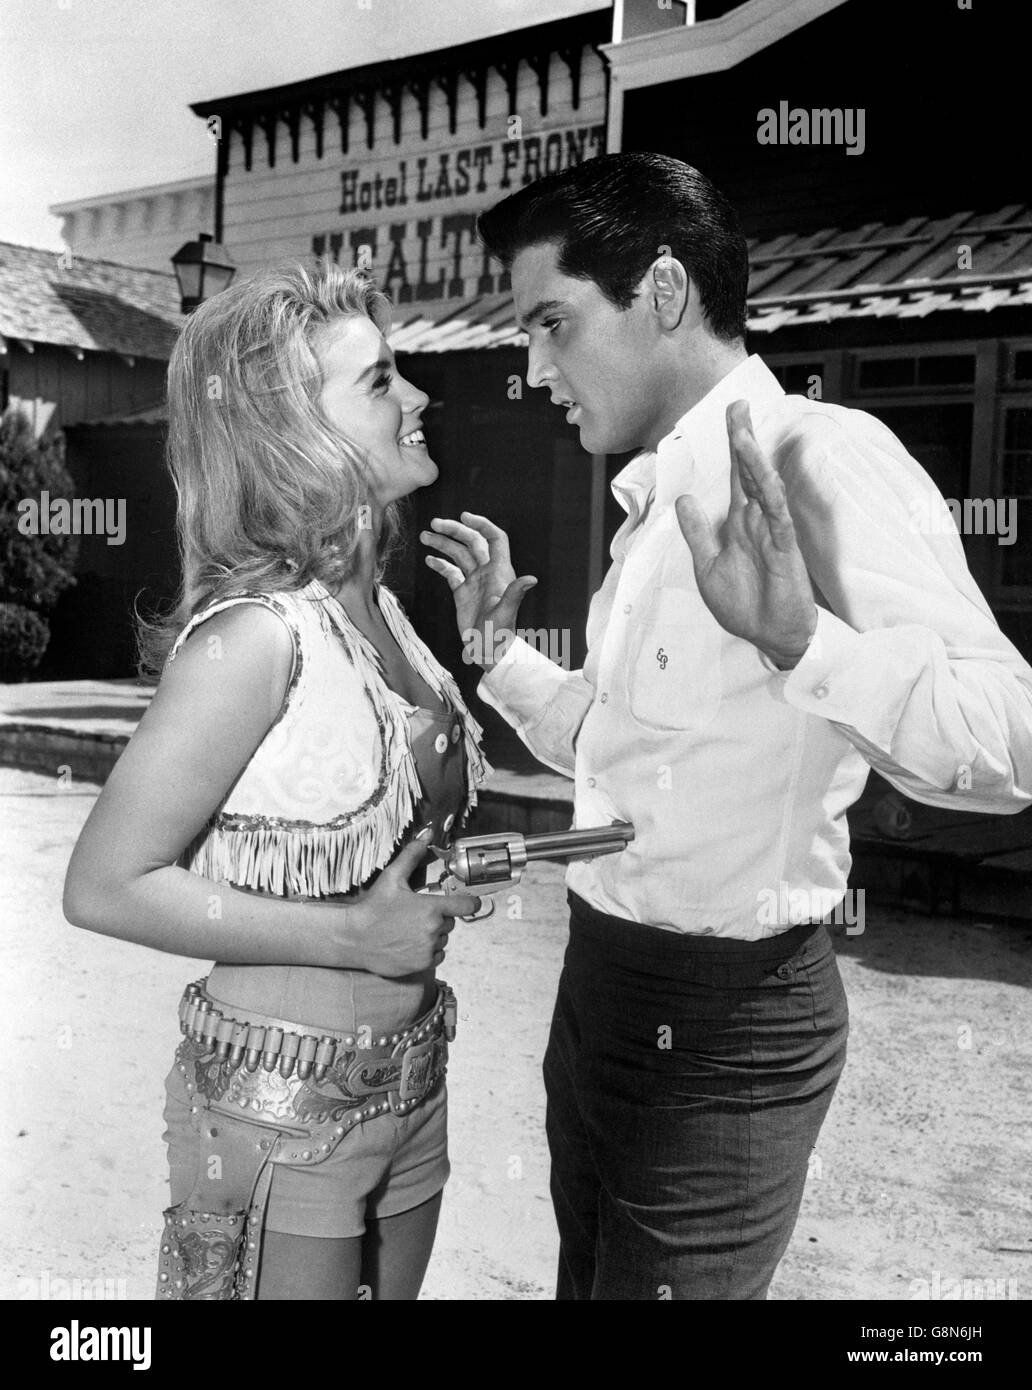 Elvis Presley has a gun playfully aimed at him by co-star Ann-Margret on the set of MGM's latest picture, 'Viva Las Vegas'. Stock Photo